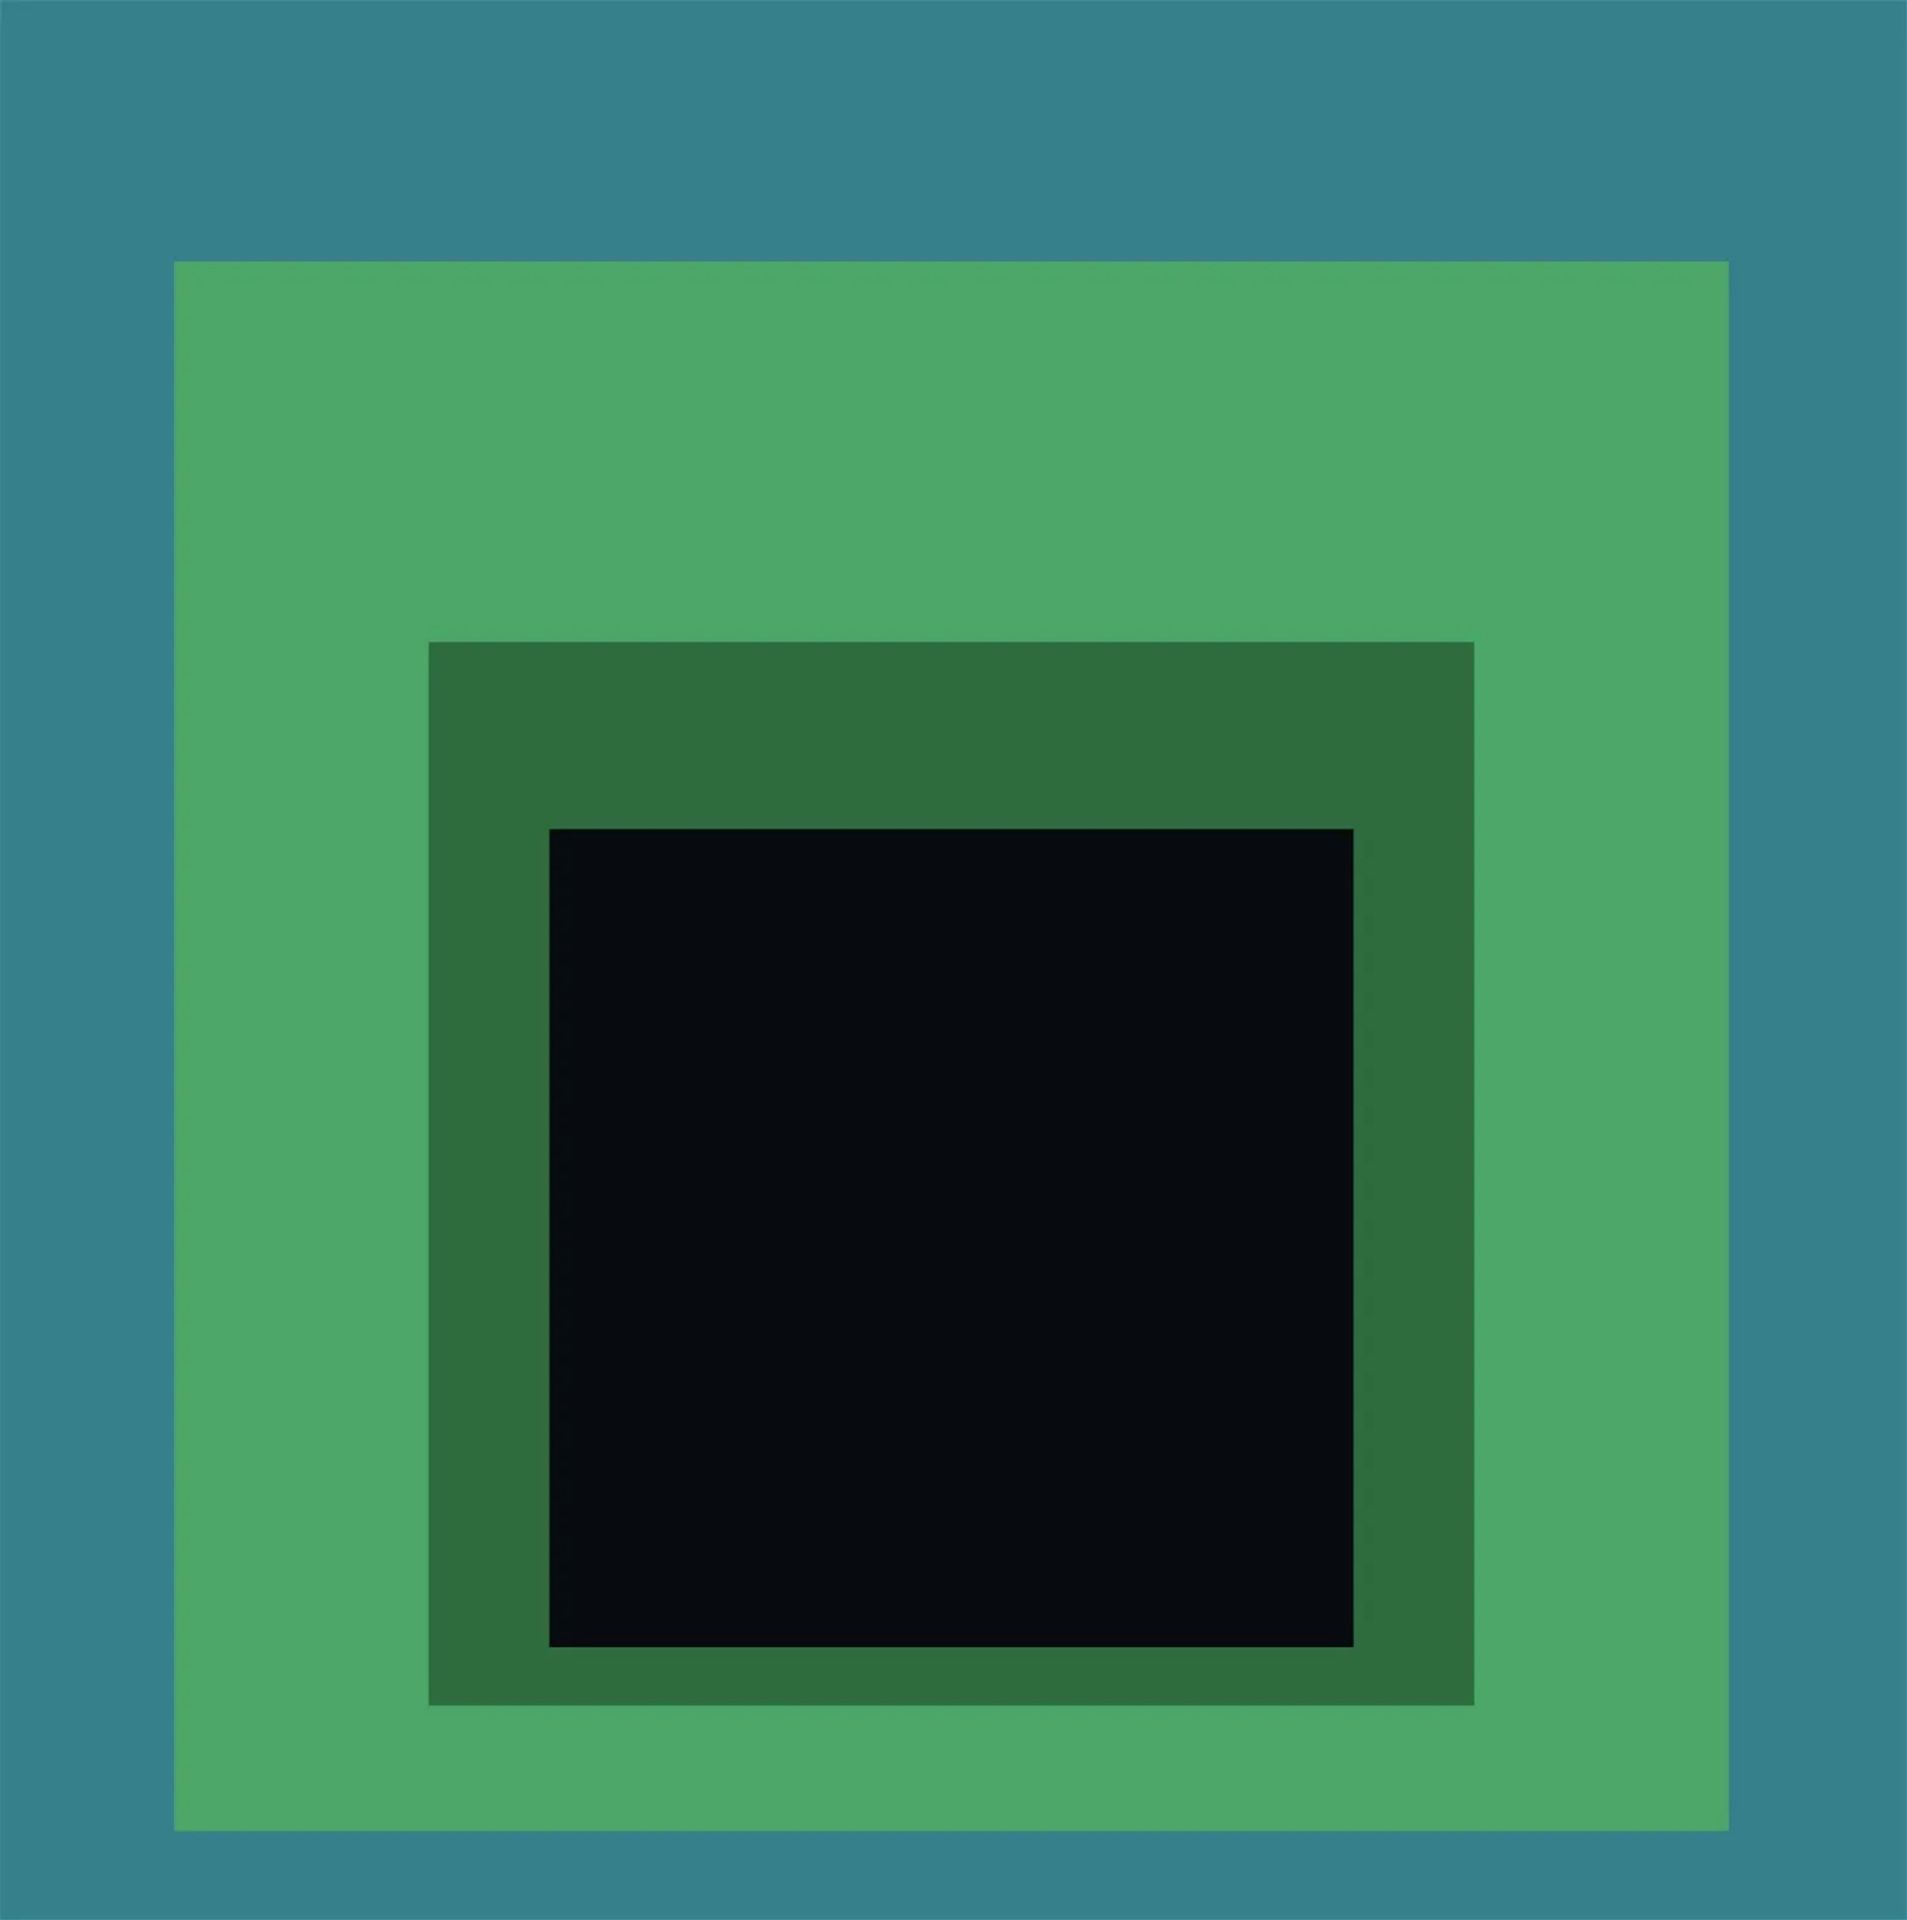 Joseph Albers Homage to the Square "Green" Offset Lithograph
